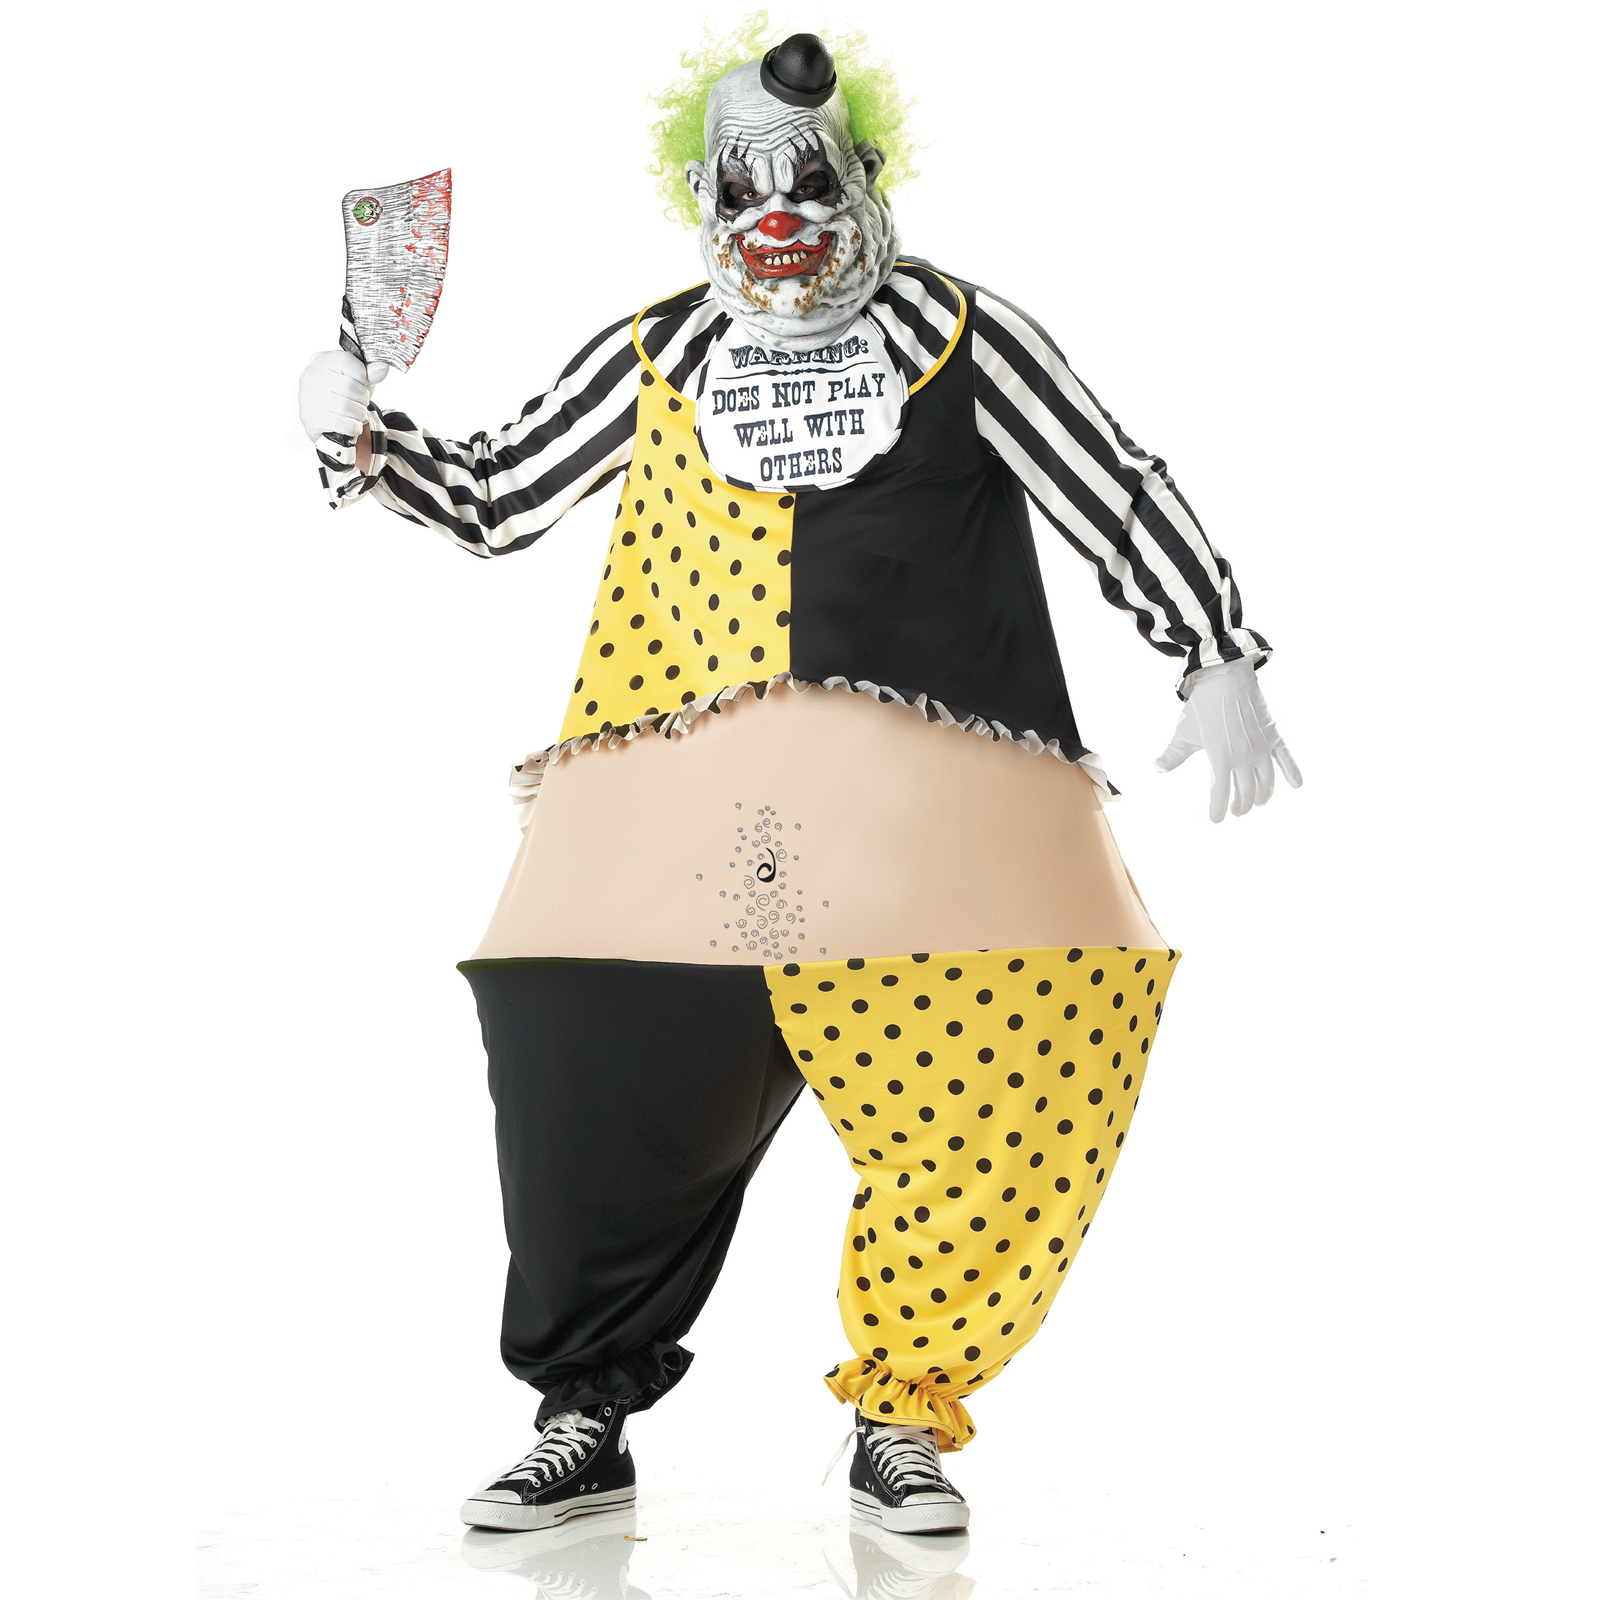 California Costume Collection Men's Tiny The Clown Adult - Standard One-Size